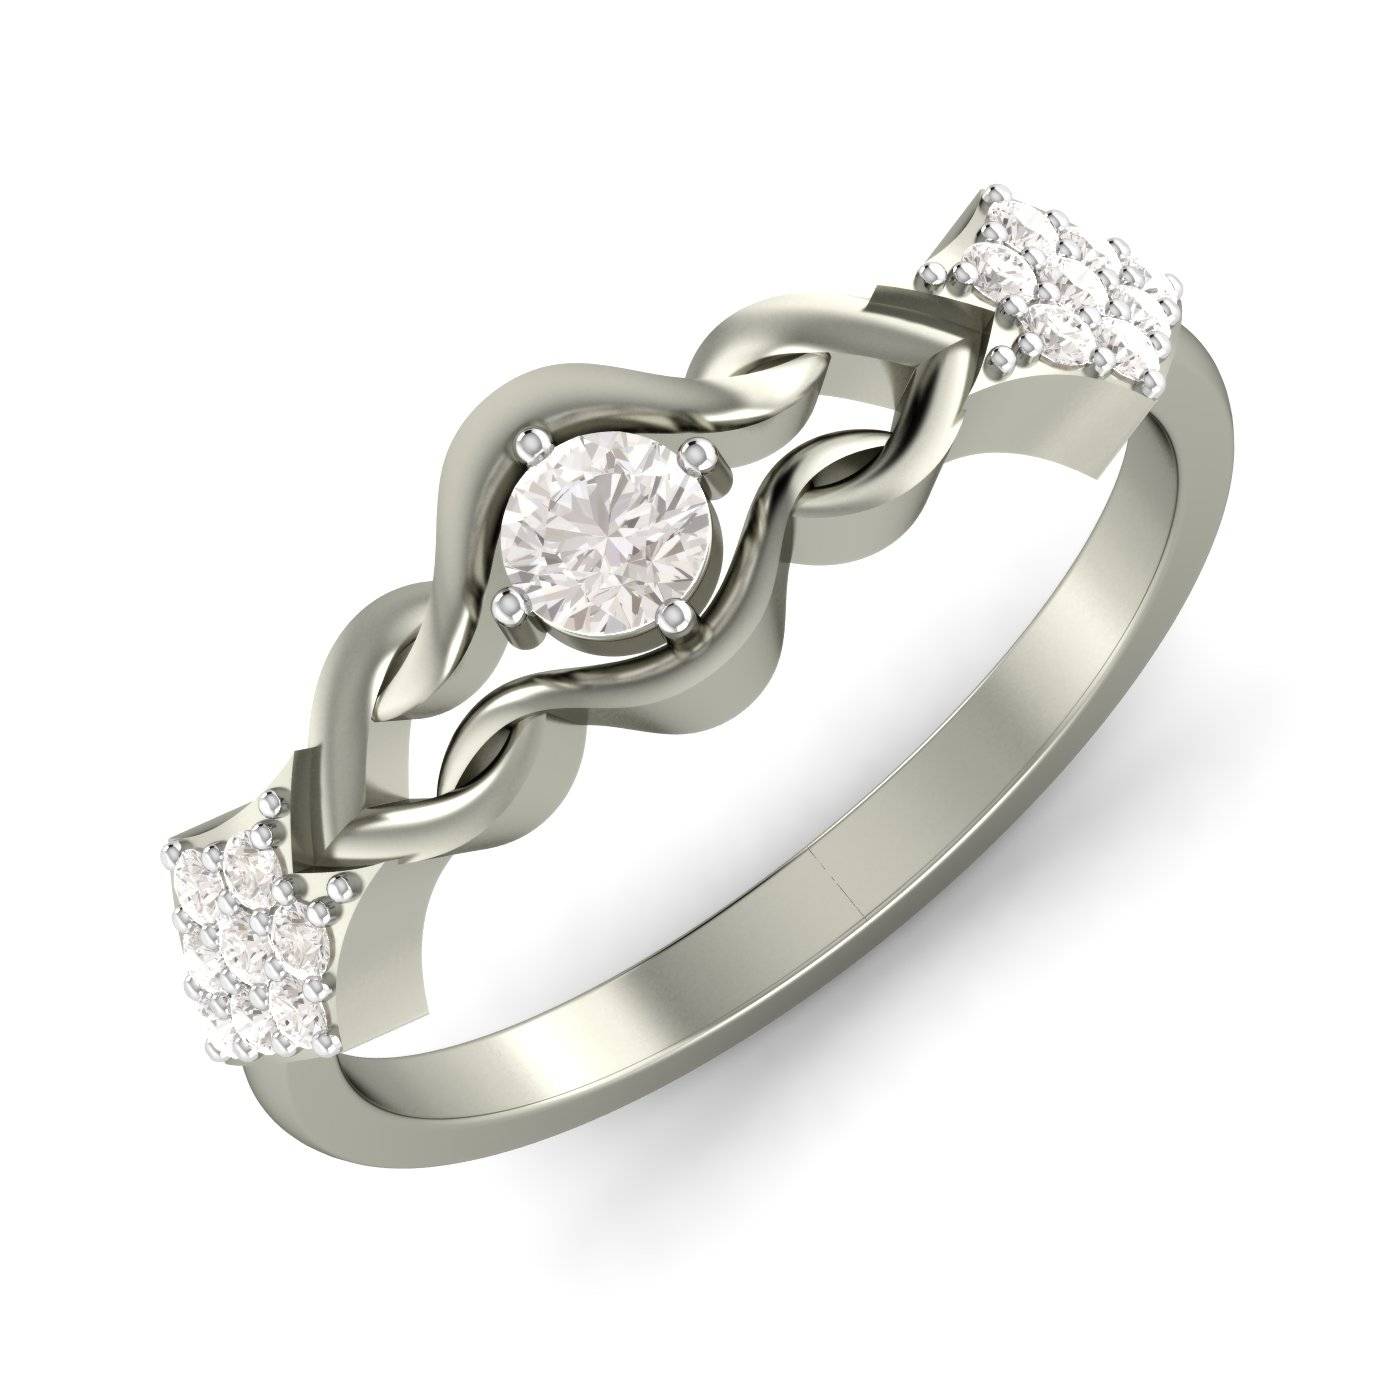 The Charming Solitude Ring